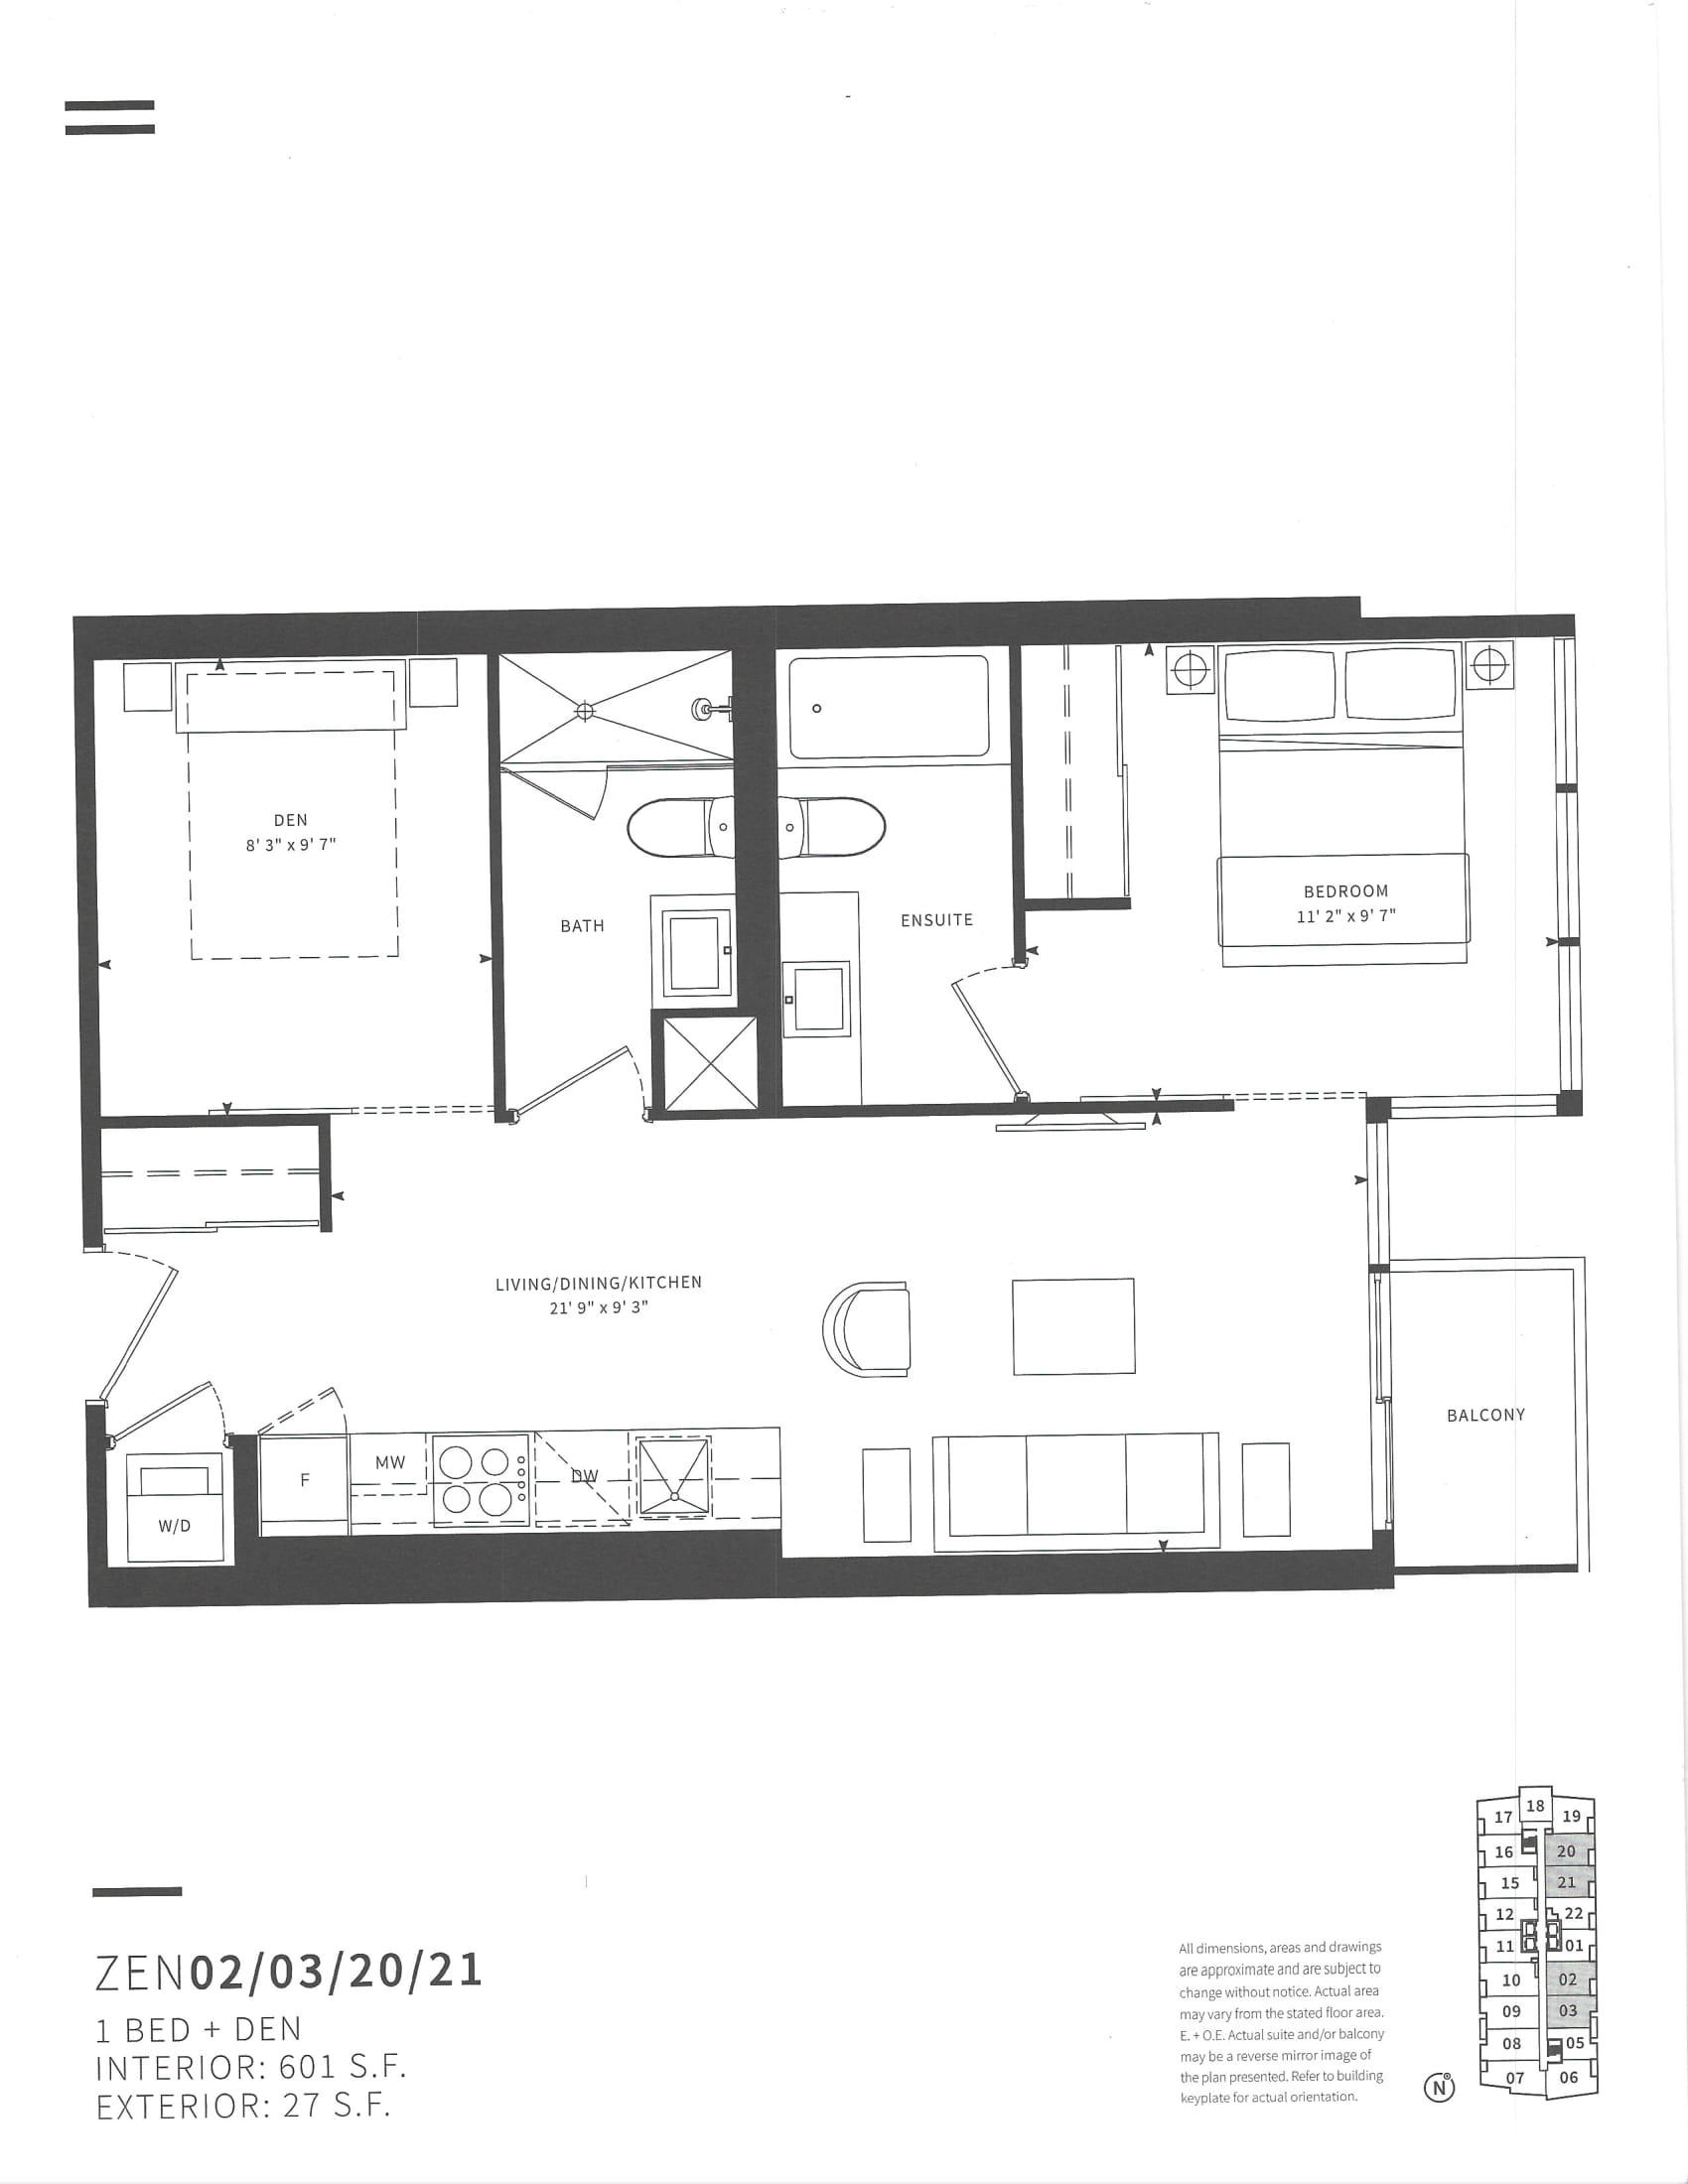 Floor plans for 19 Western Battery Rd Unit 2921.